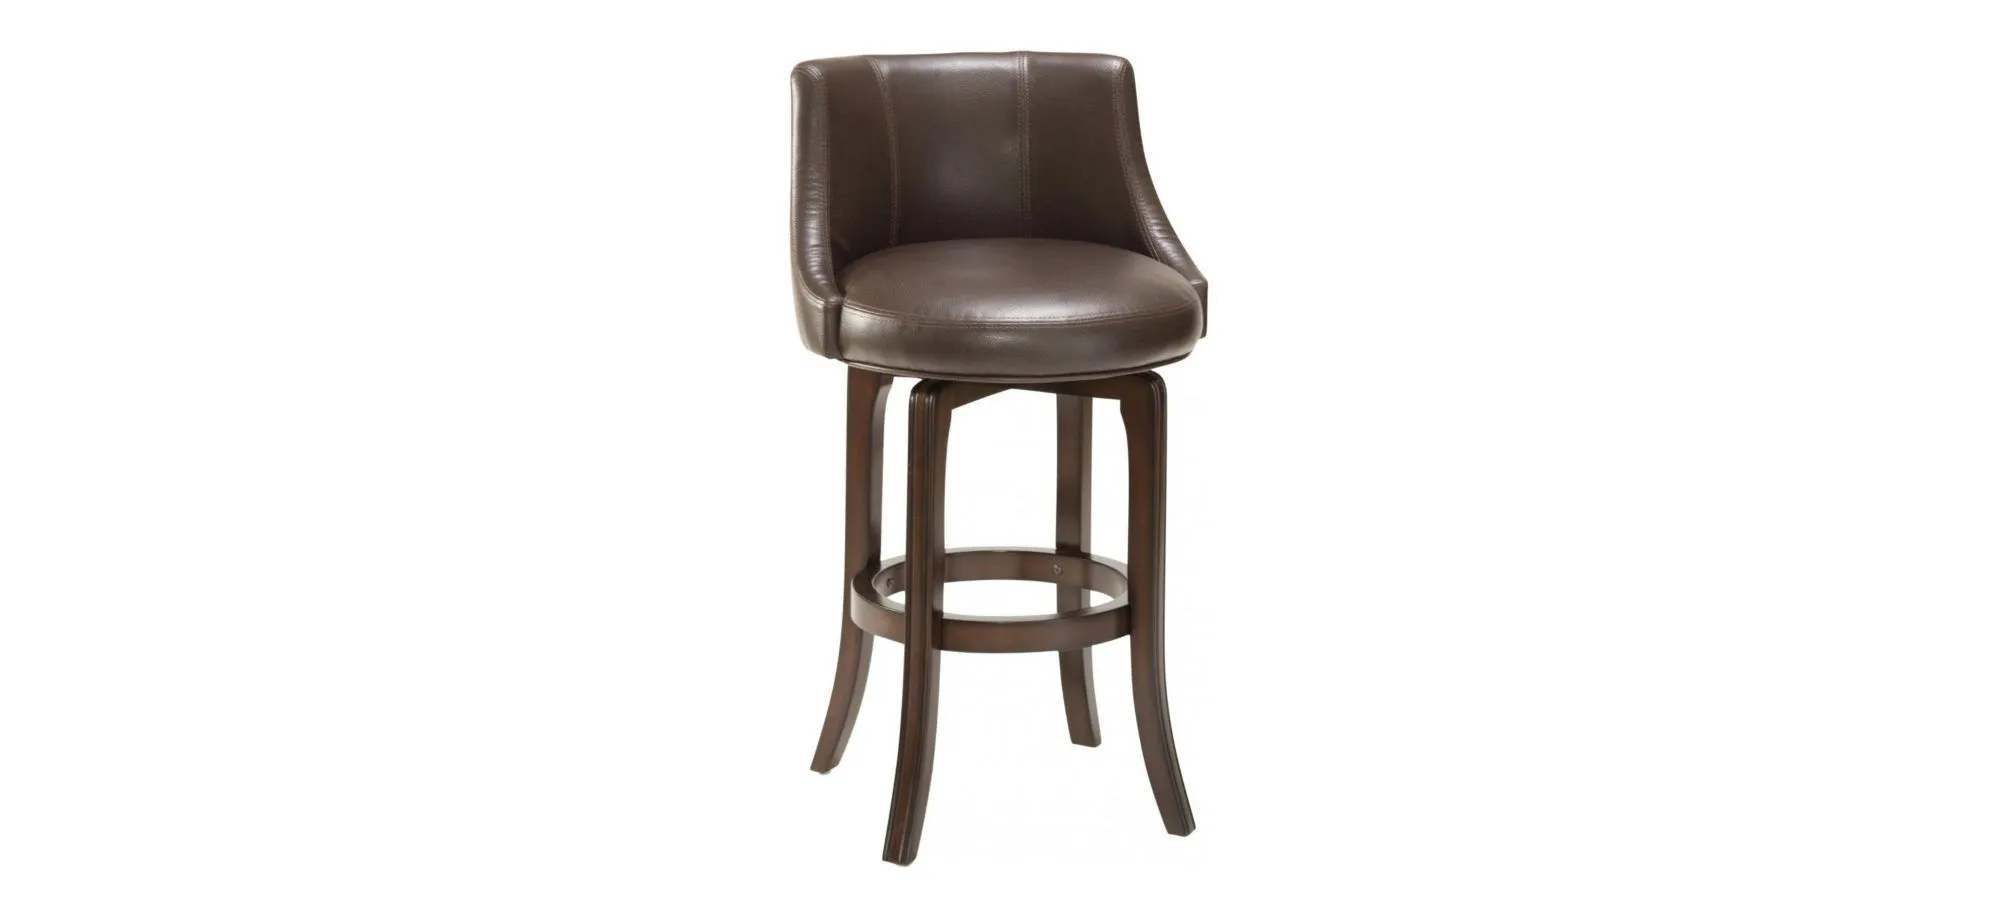 Napa Valley Leather Swivel Counter Stool - Brown in Brown by Hillsdale Furniture